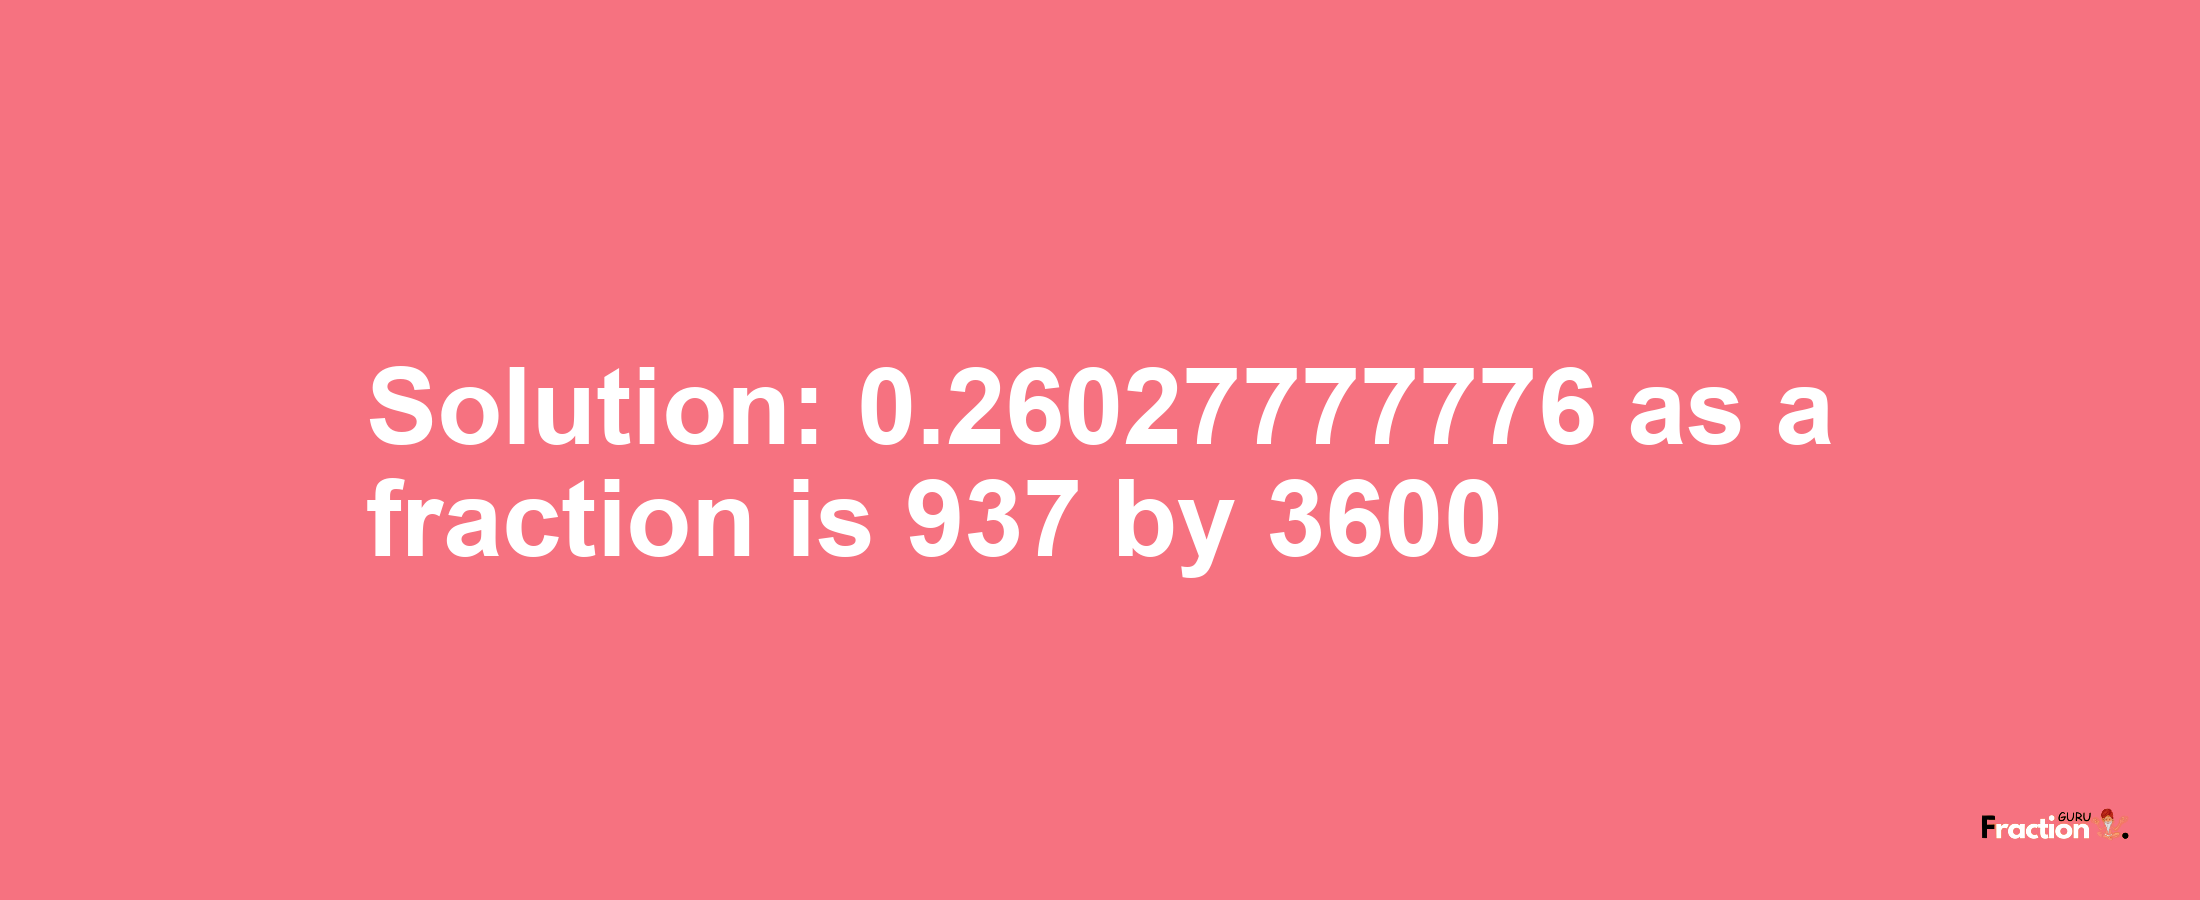 Solution:0.26027777776 as a fraction is 937/3600